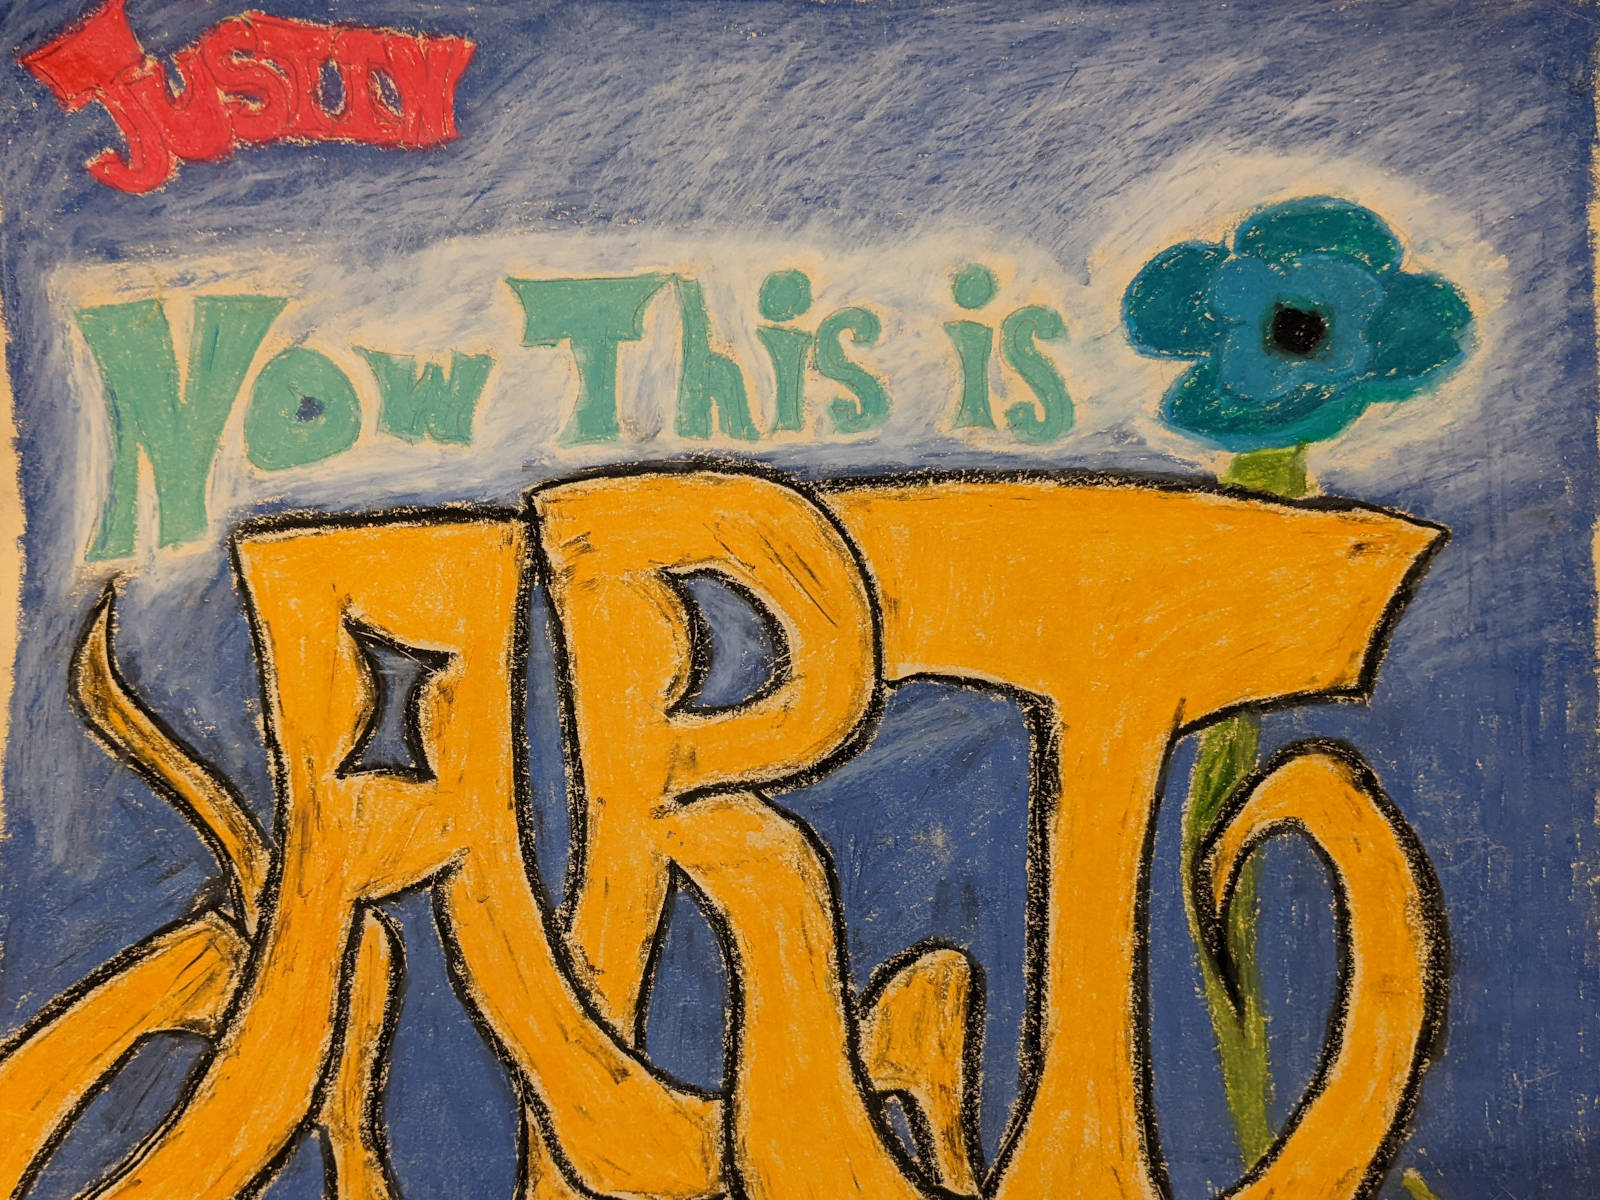 Colorful drawing with the name “Justin” at the top, followed by the phrase “Now This Is Art.”